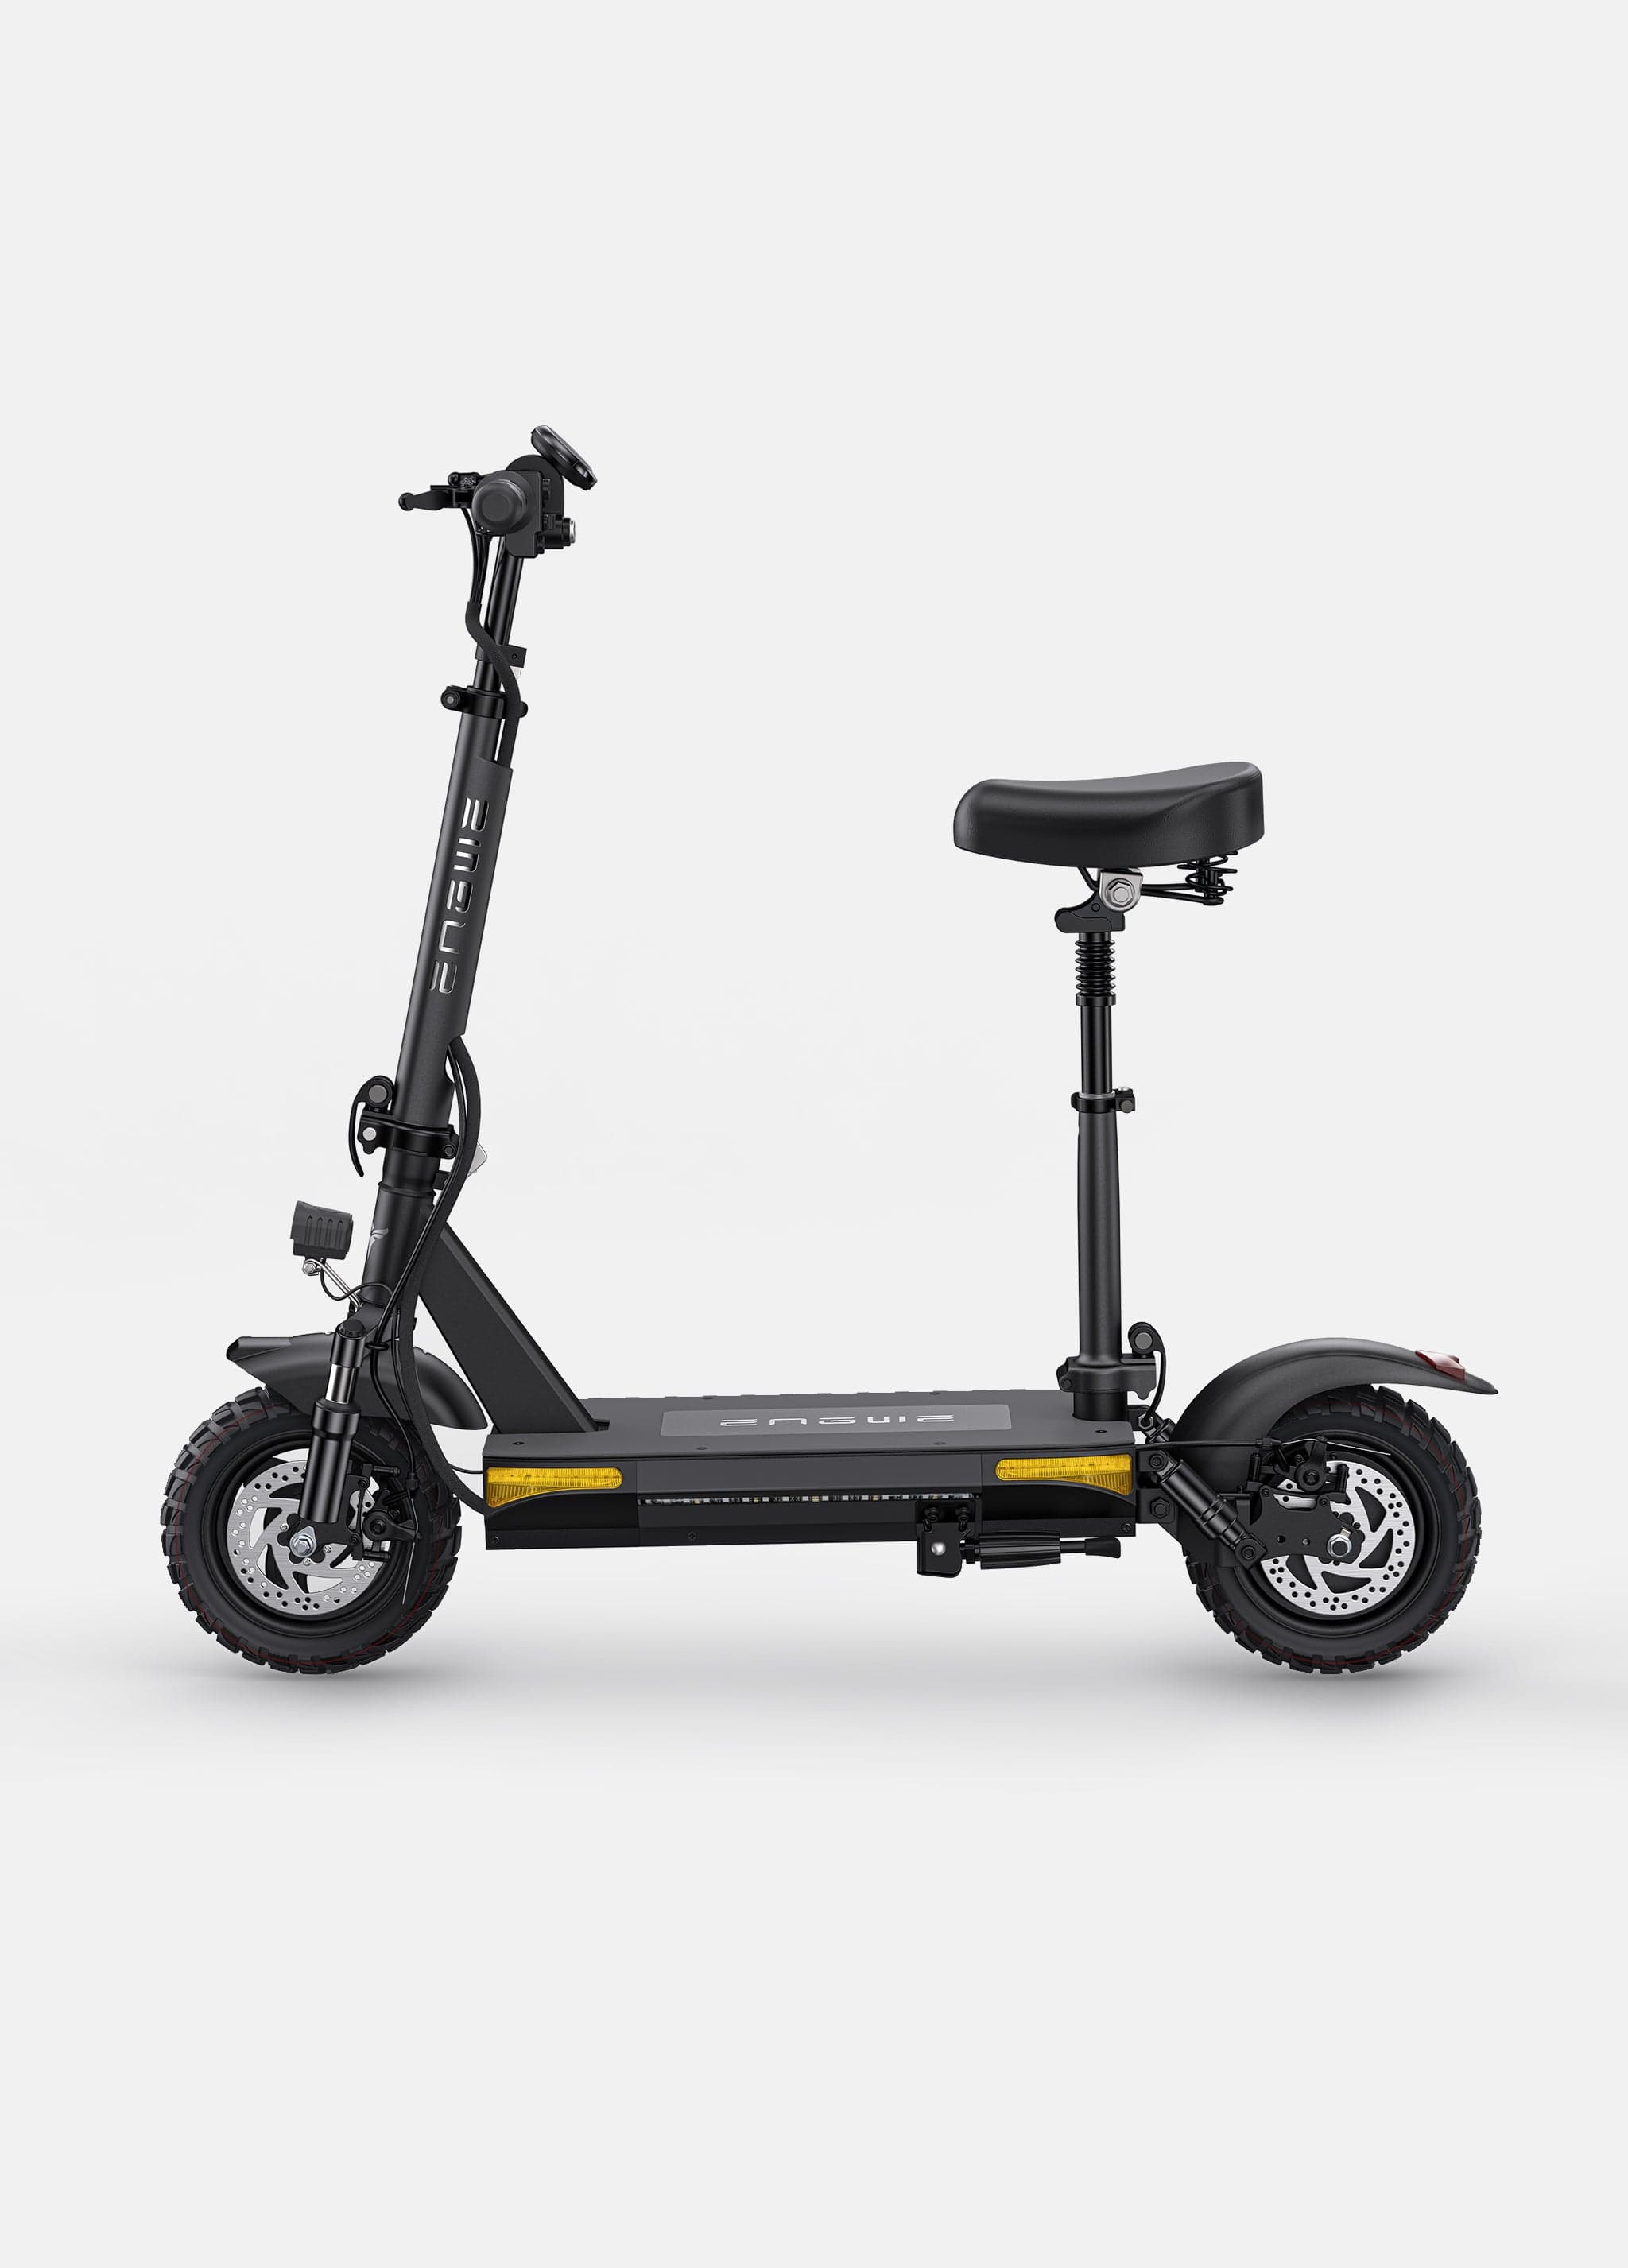 EZ-S6 iEZWAY Off Road Electric Scooter with 500W Motor,48V15.6Ah Battery, Max Speed 28 mph and 10" Tires